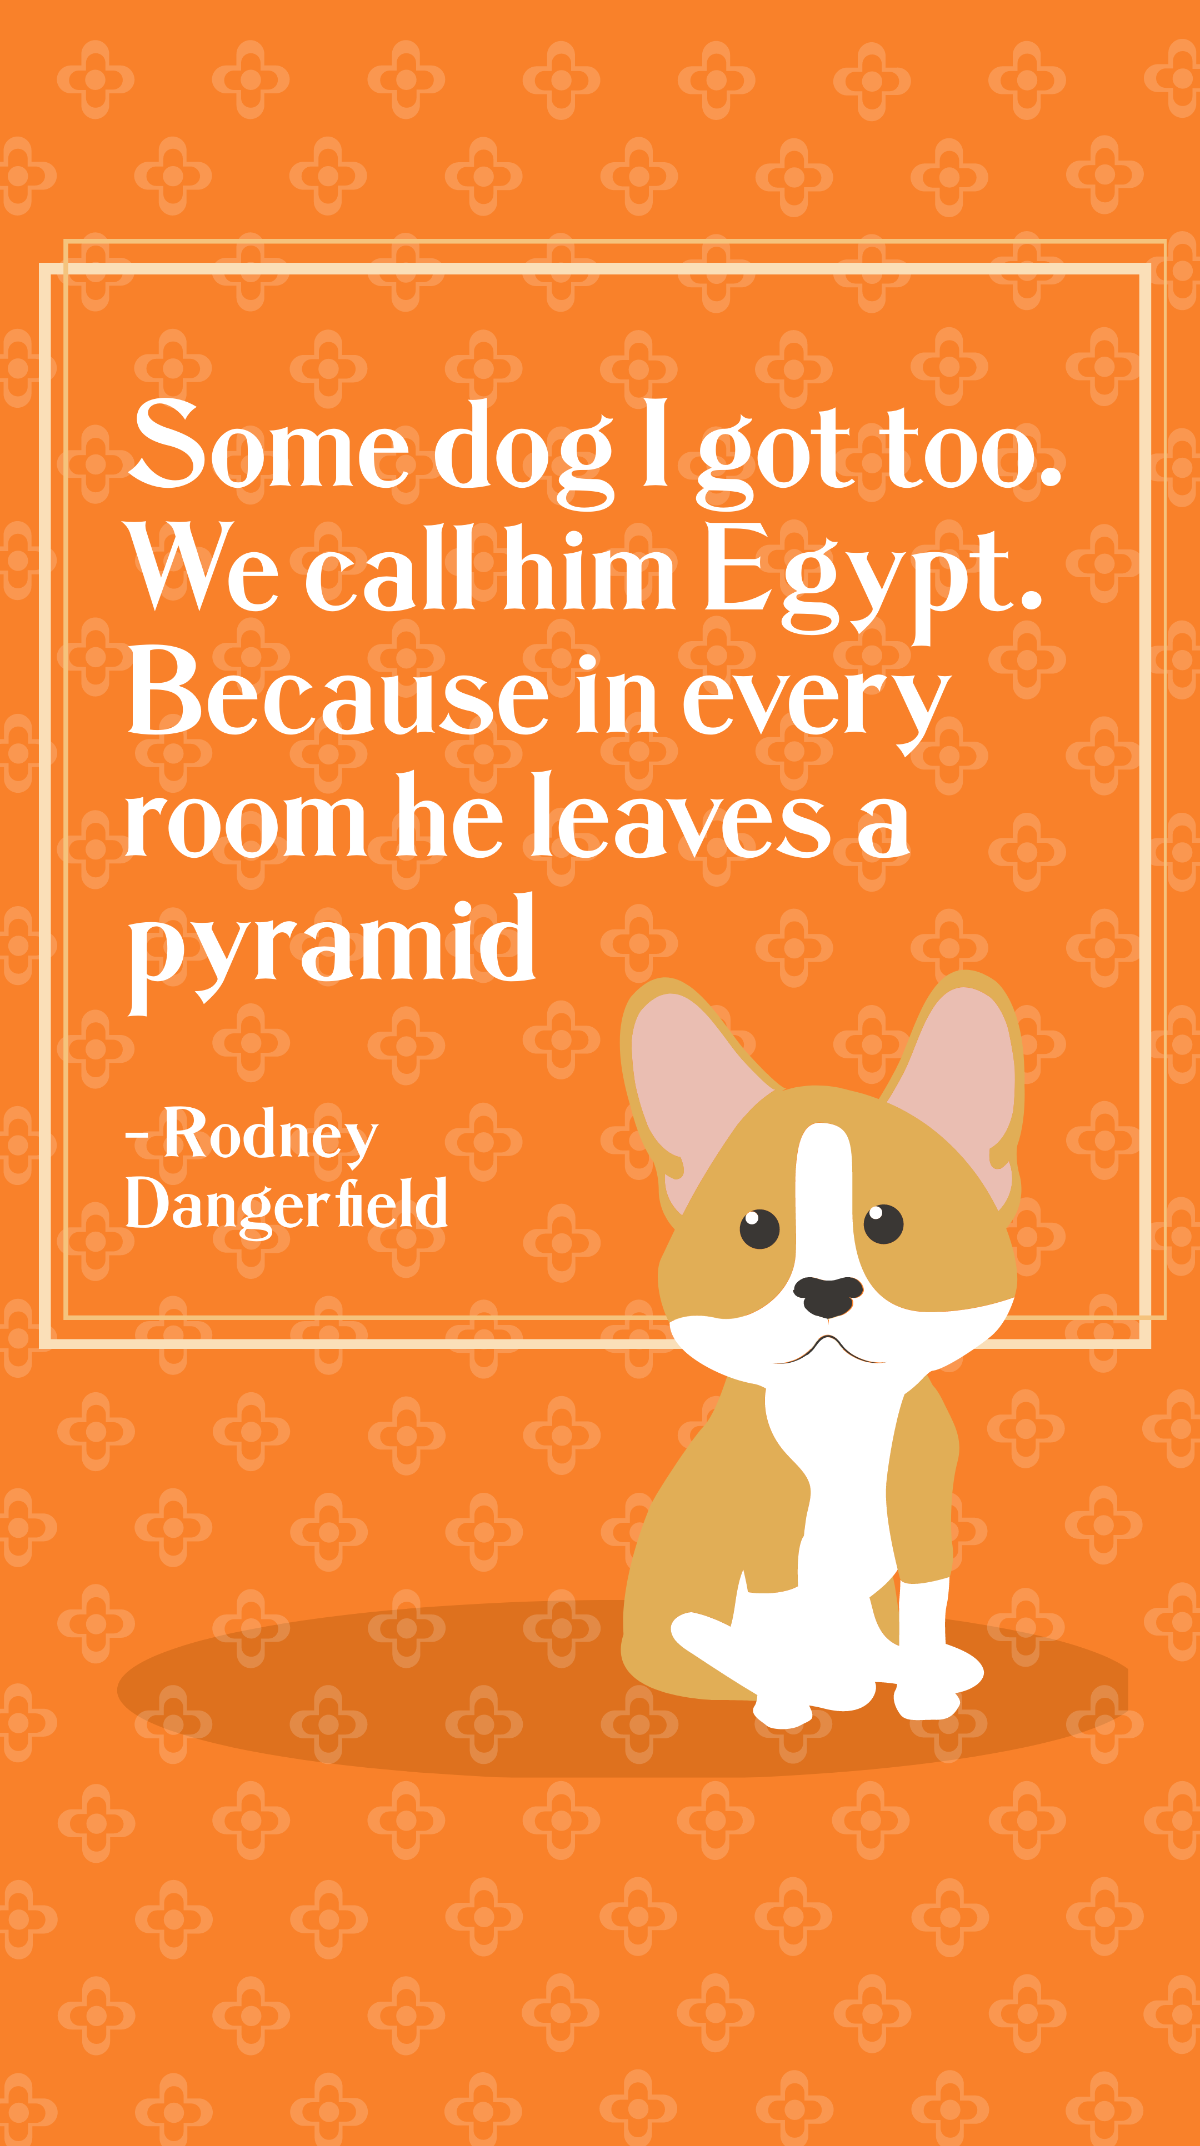 Rodney Dangerfield - Some dog I got too. We call him Egypt. Because in every room he leaves a pyramid